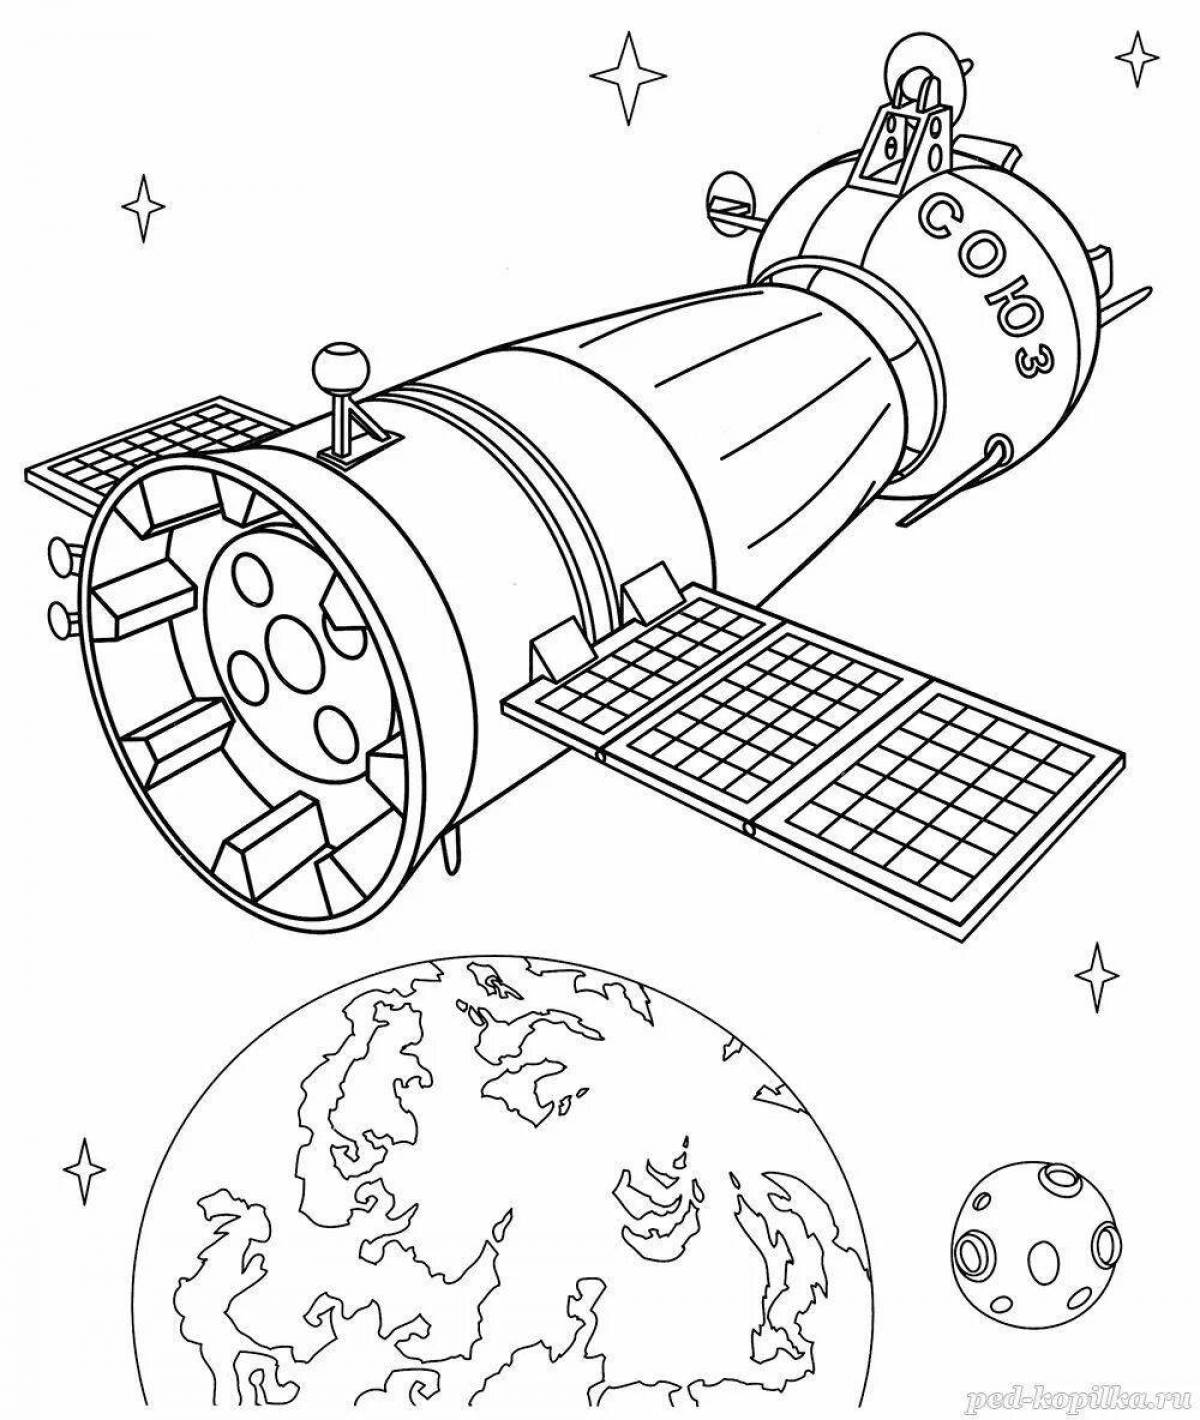 Adorable space station coloring page